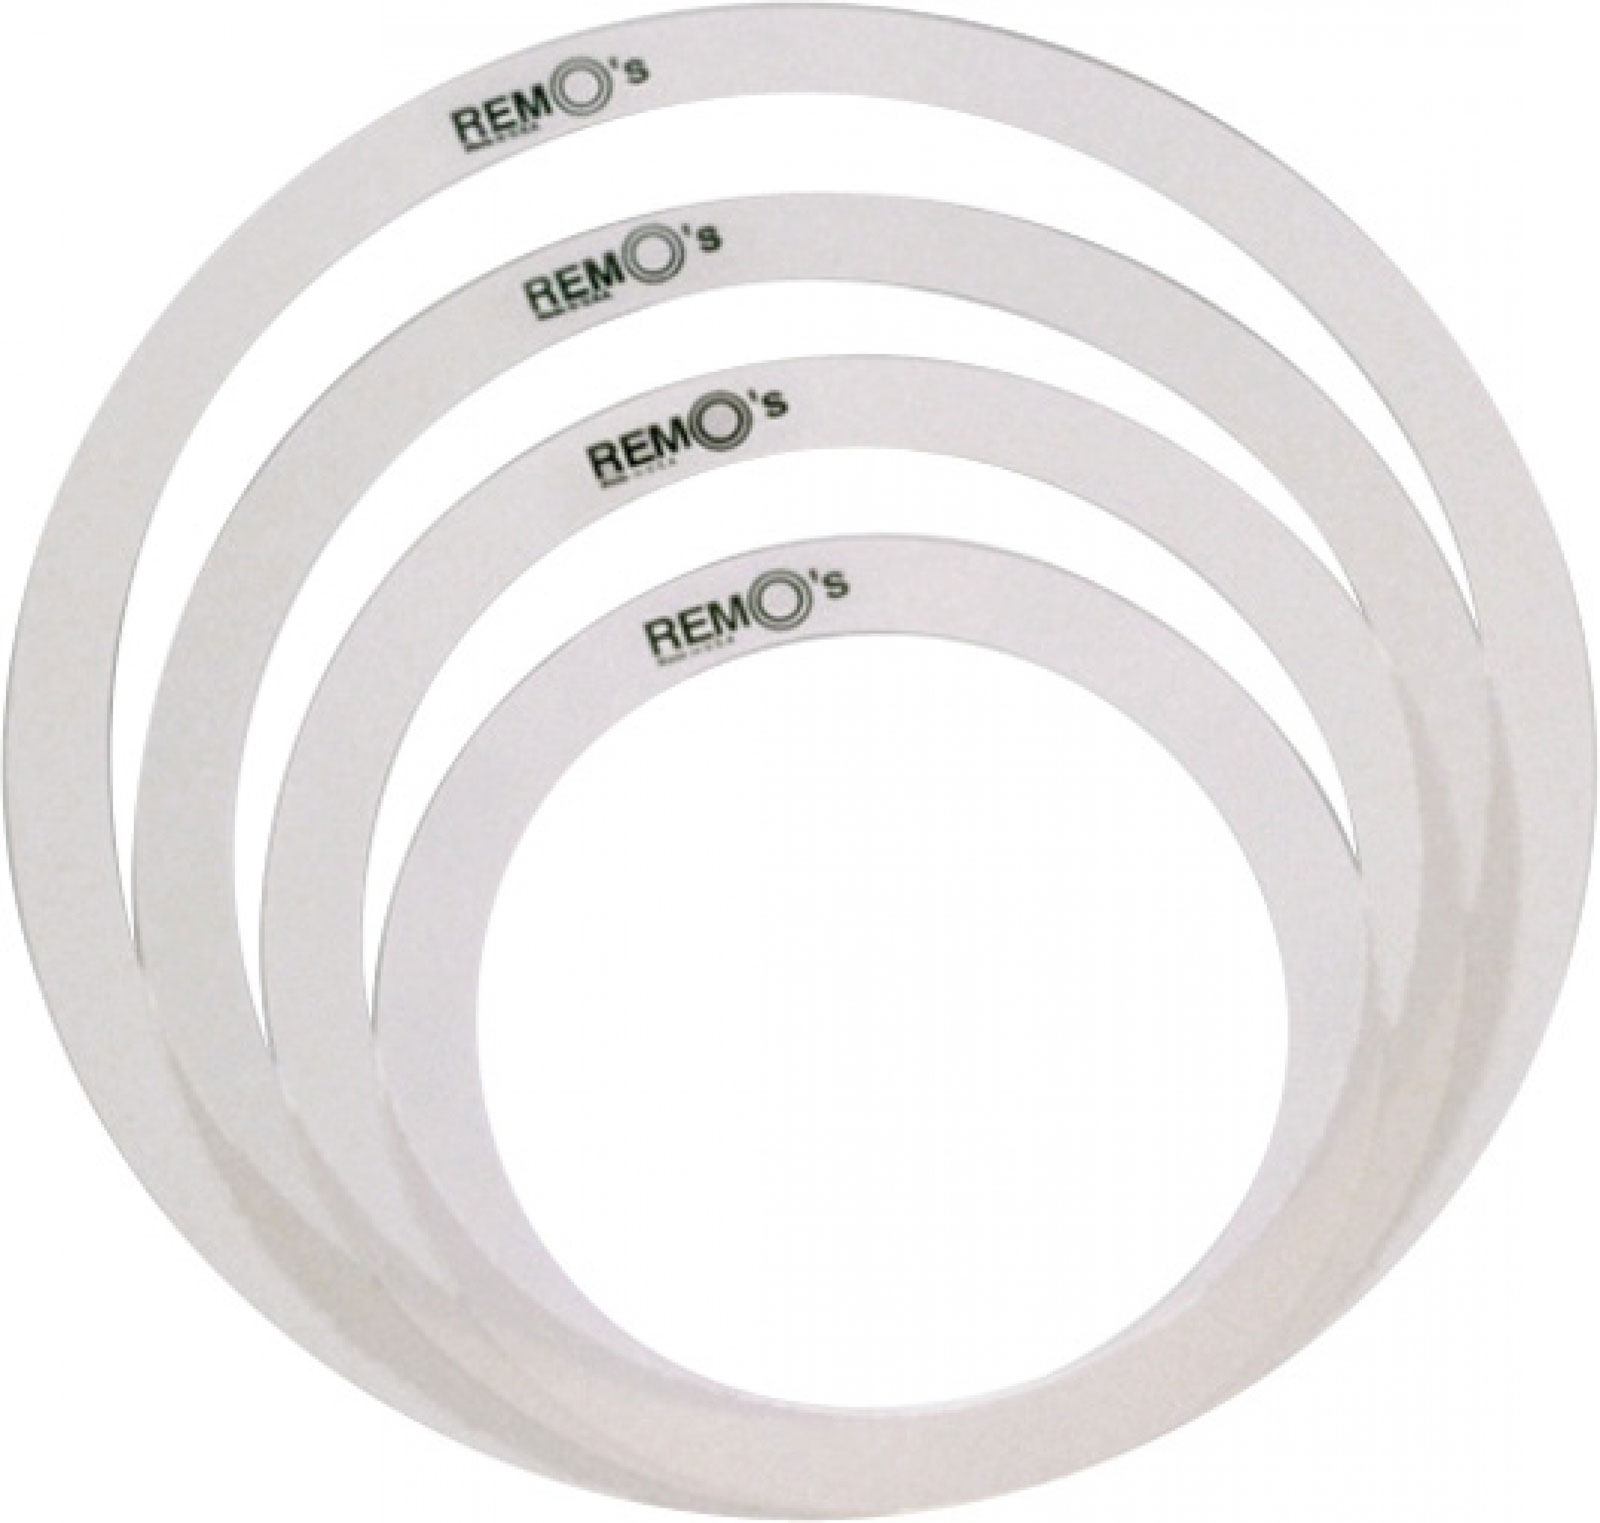 REMO RO-2346-00 - PACK SOURDINES MUFFLE RING TONE CONTROL 12/13/14/16 